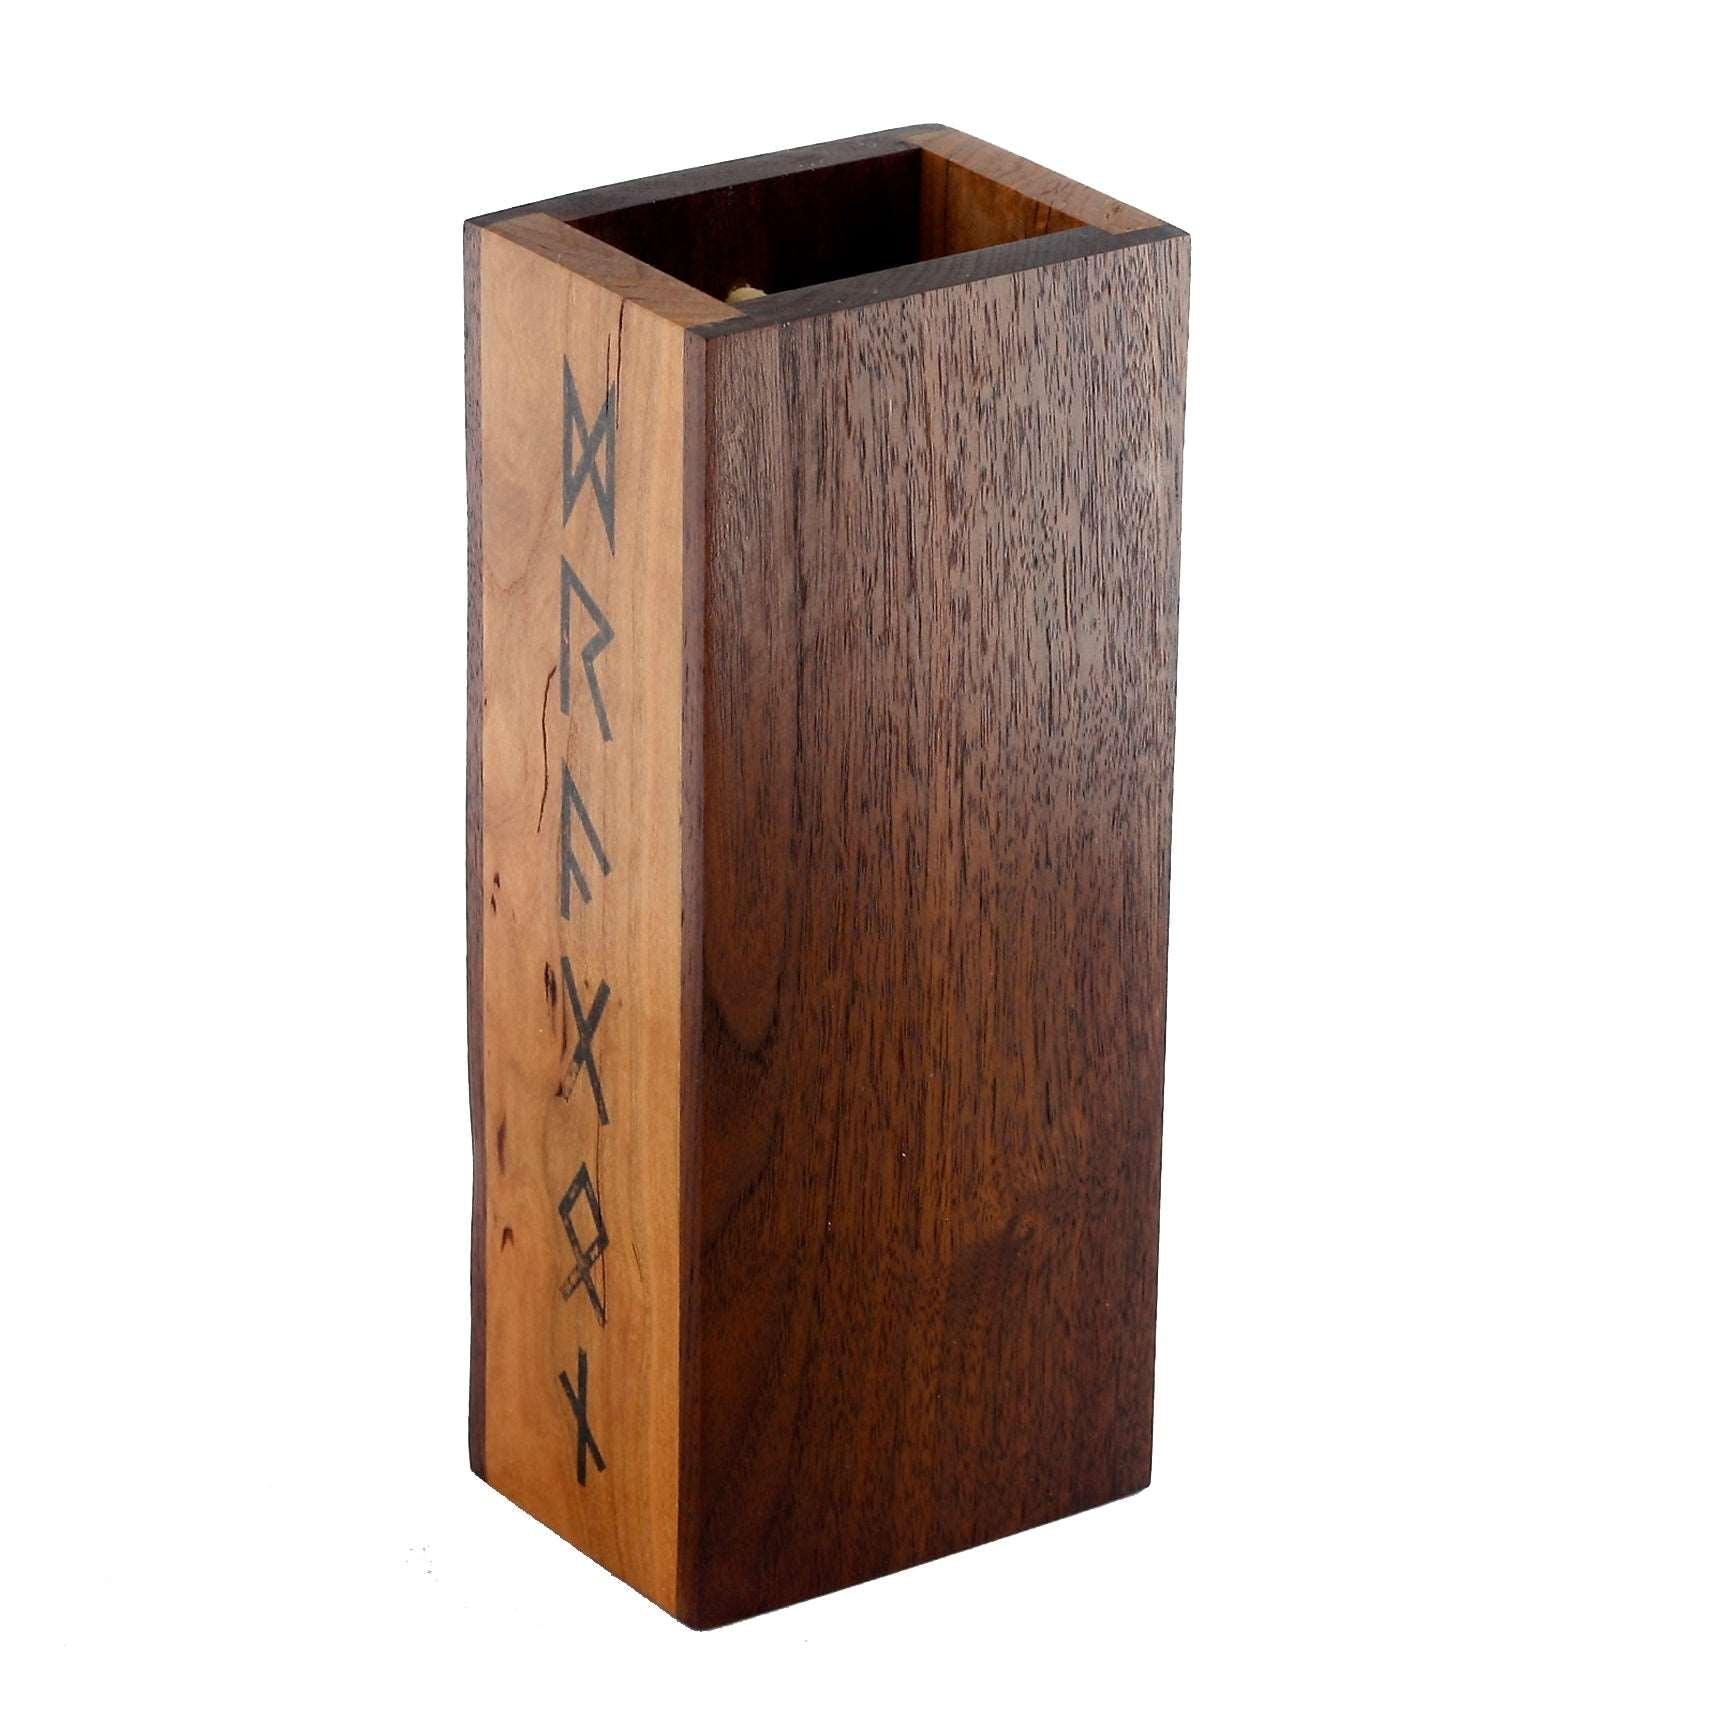 Premium hardwood dice tower made from walnut and cherry featuring runes down the side.